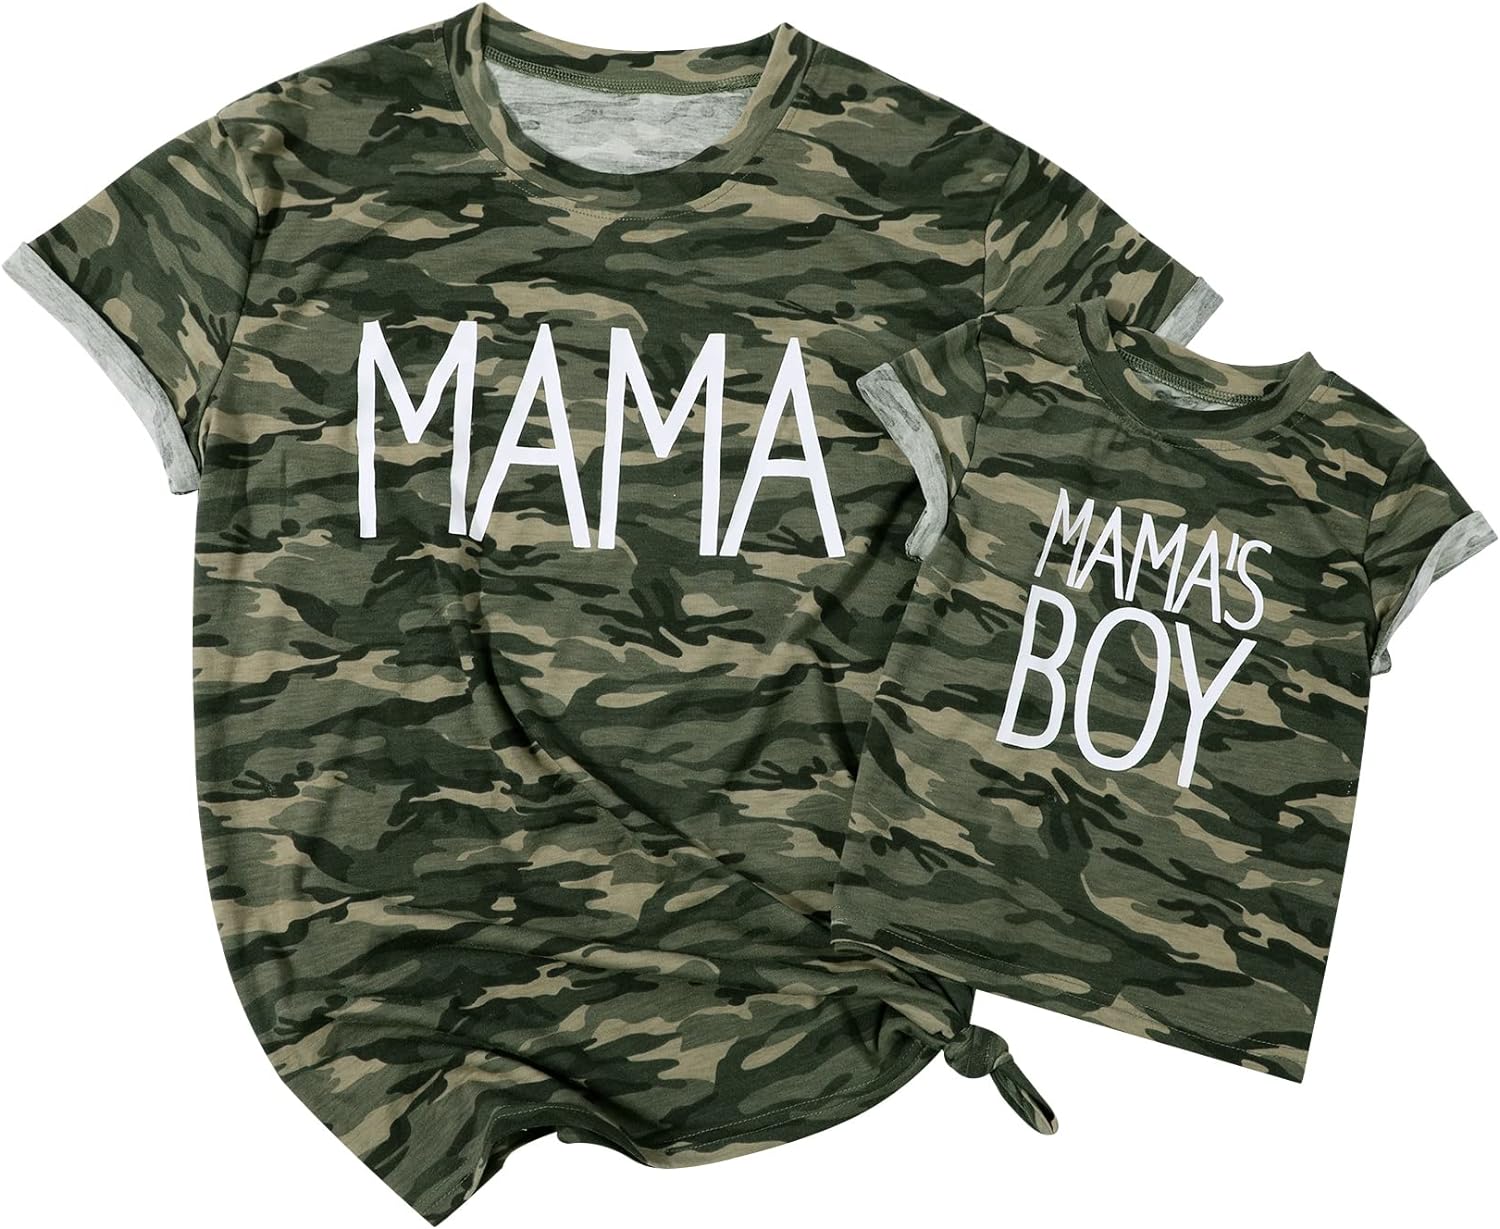 Mama and Baby Matching Camo Shirts Matching Family Camouflage Sets Mama&#39; Boy Tshirt Clothes Outfits